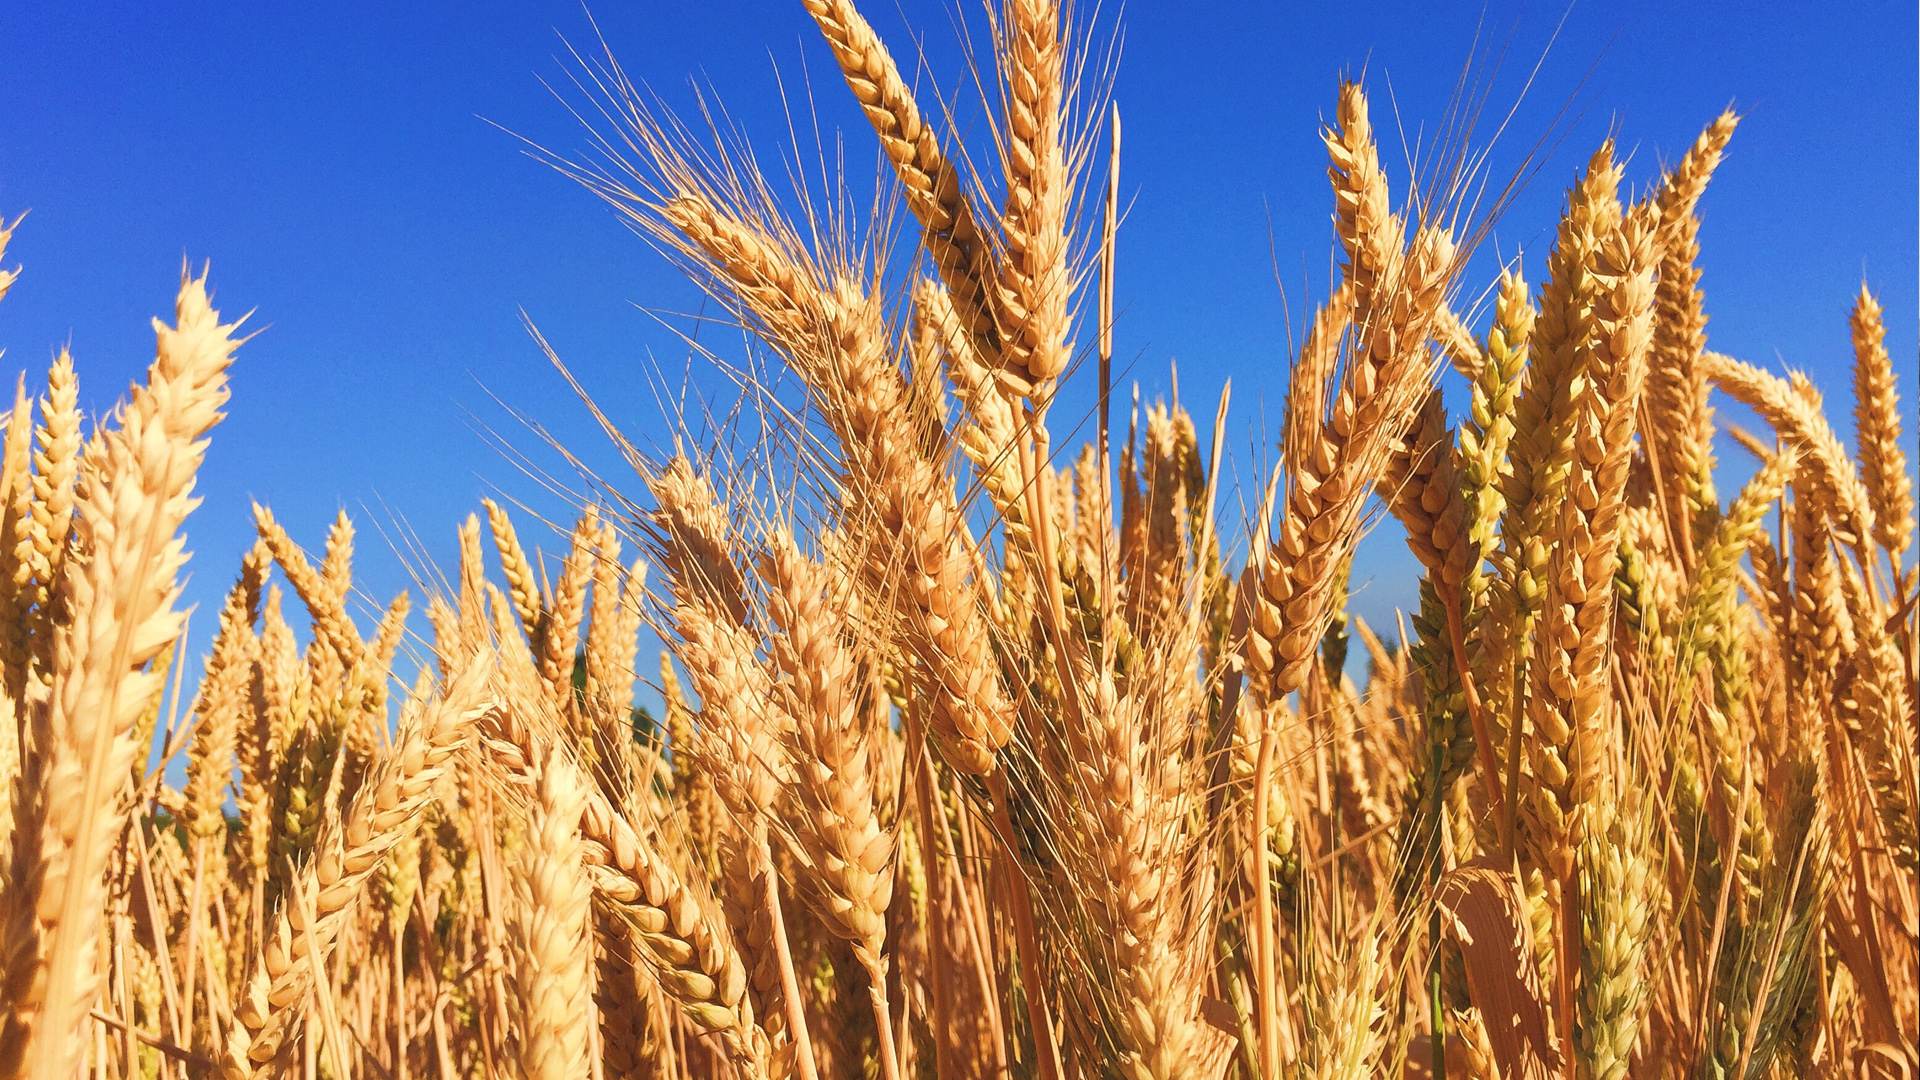 Policy Progress: Ministry of Economy Published Draft Amendments for Simplifying Phytosanitary Procedures for Barley Exports